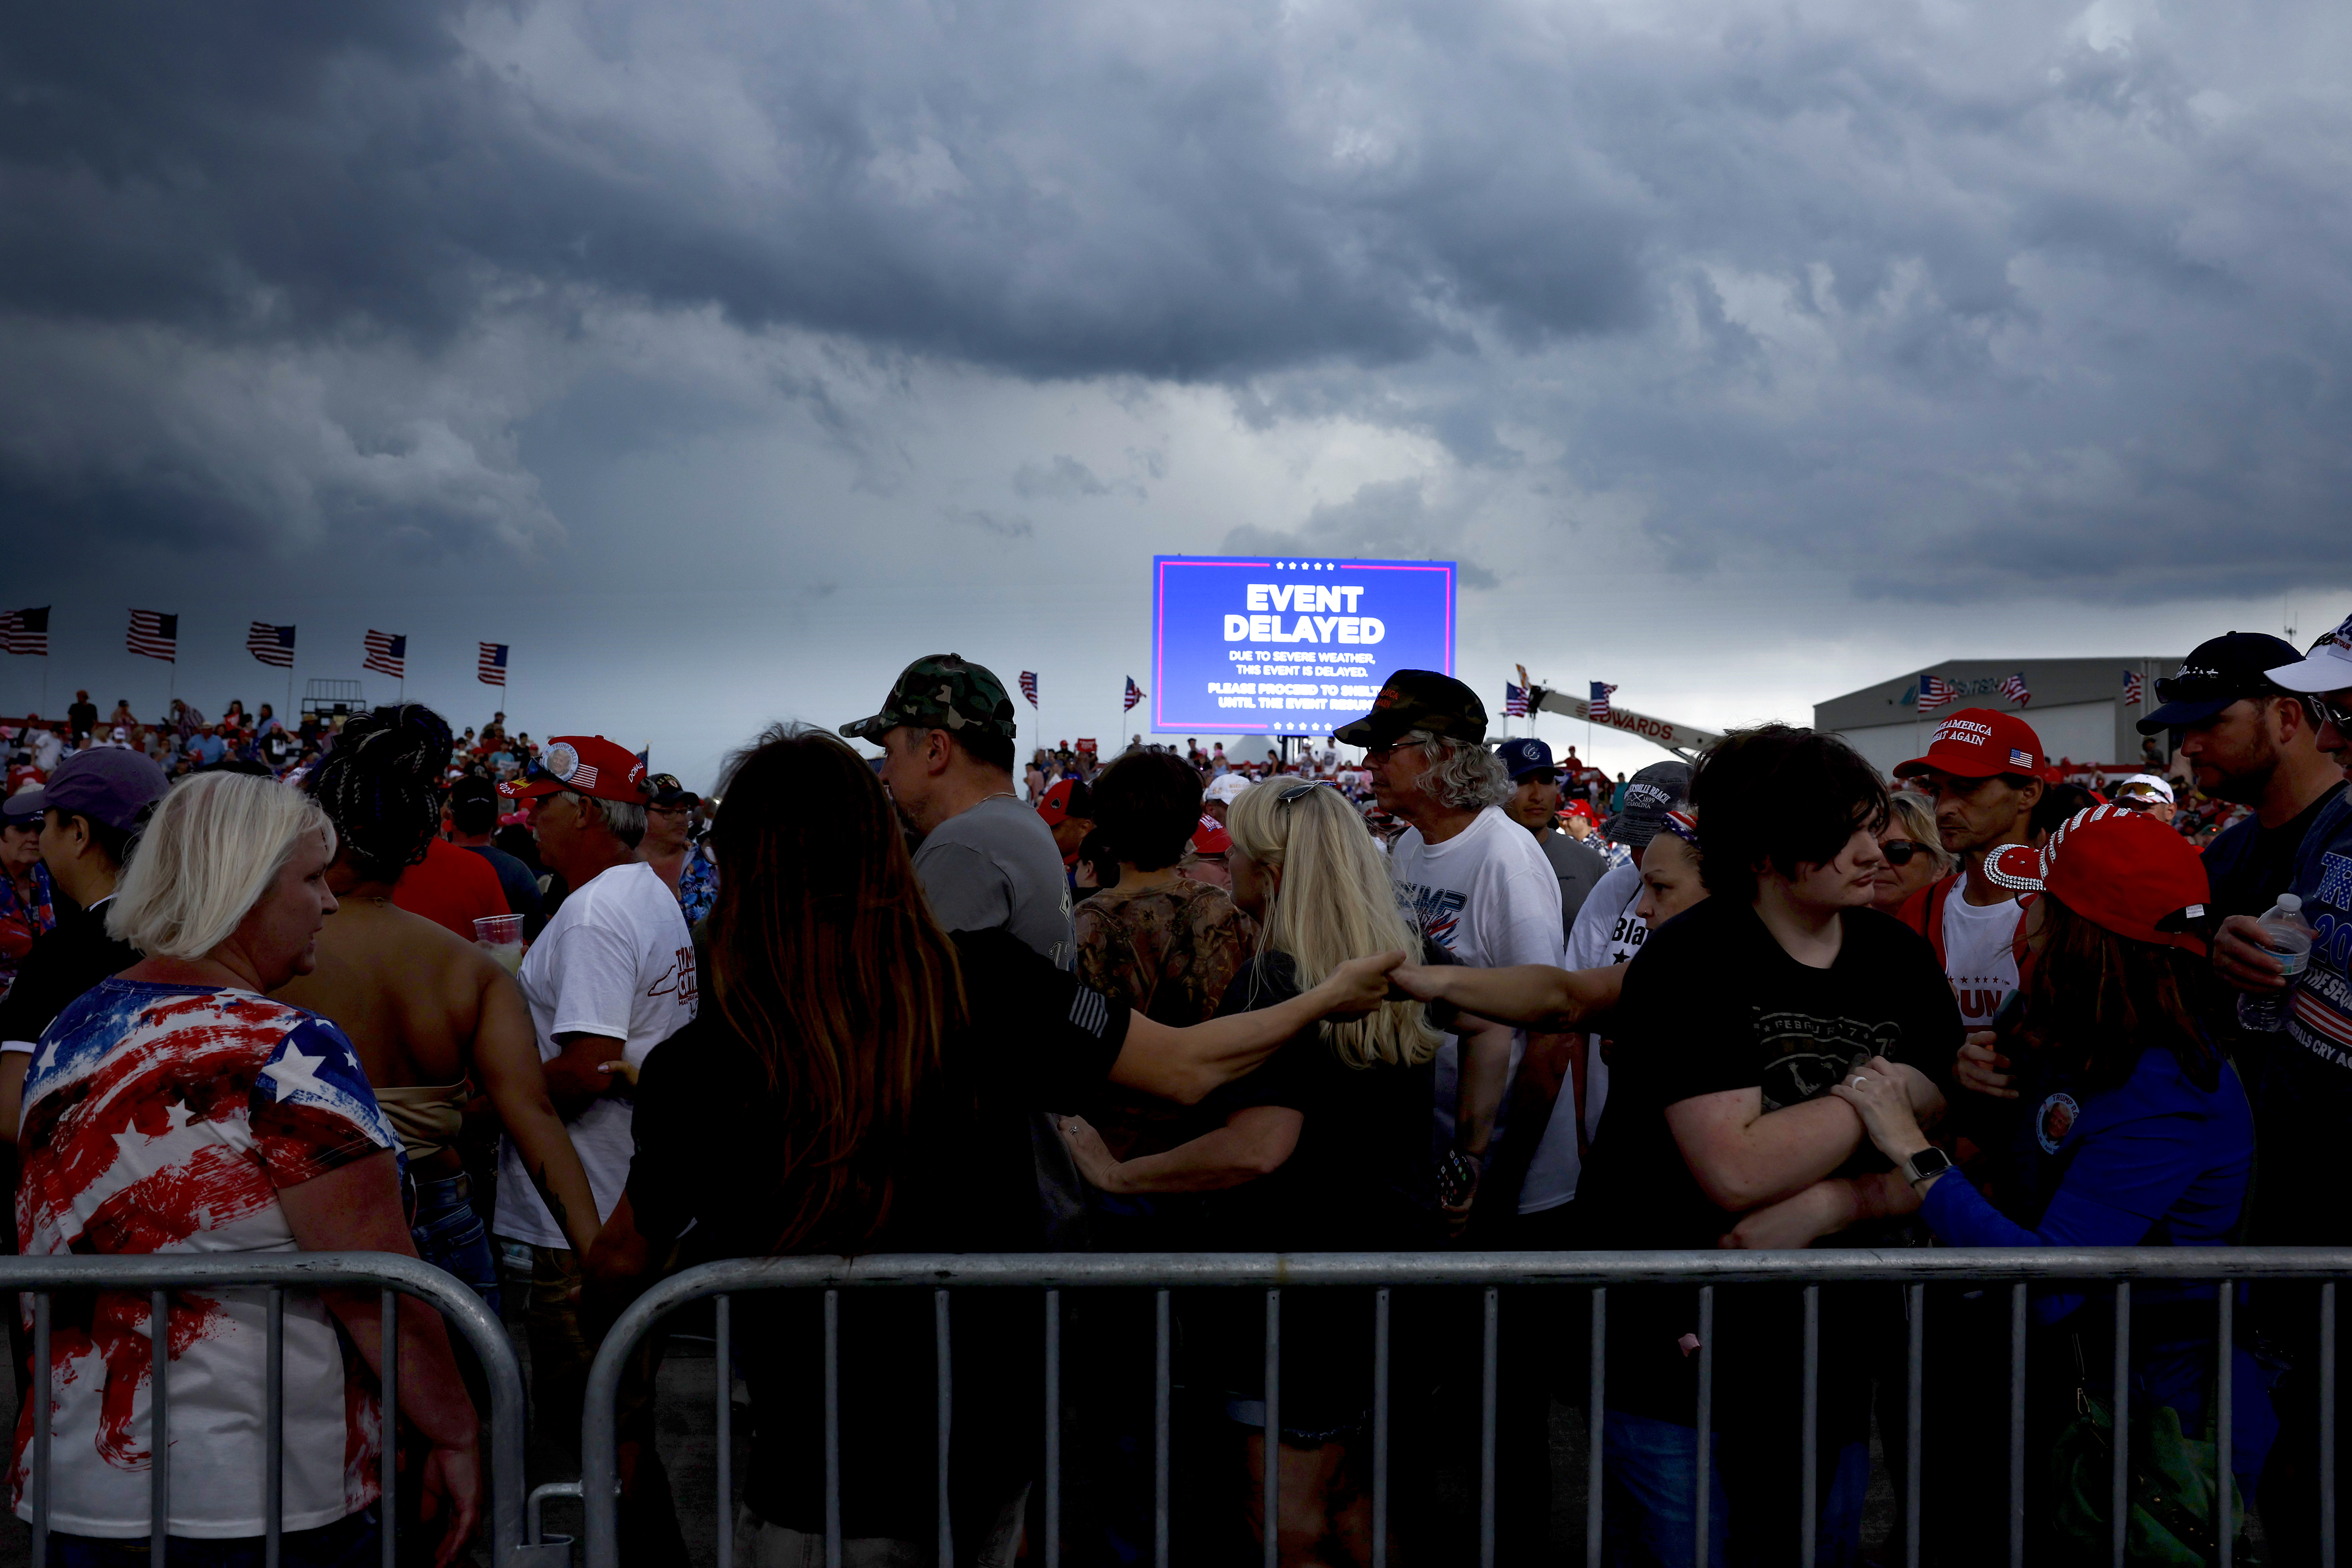  Trump Rally in North Carolina Called Off Due to Thunderstorm 